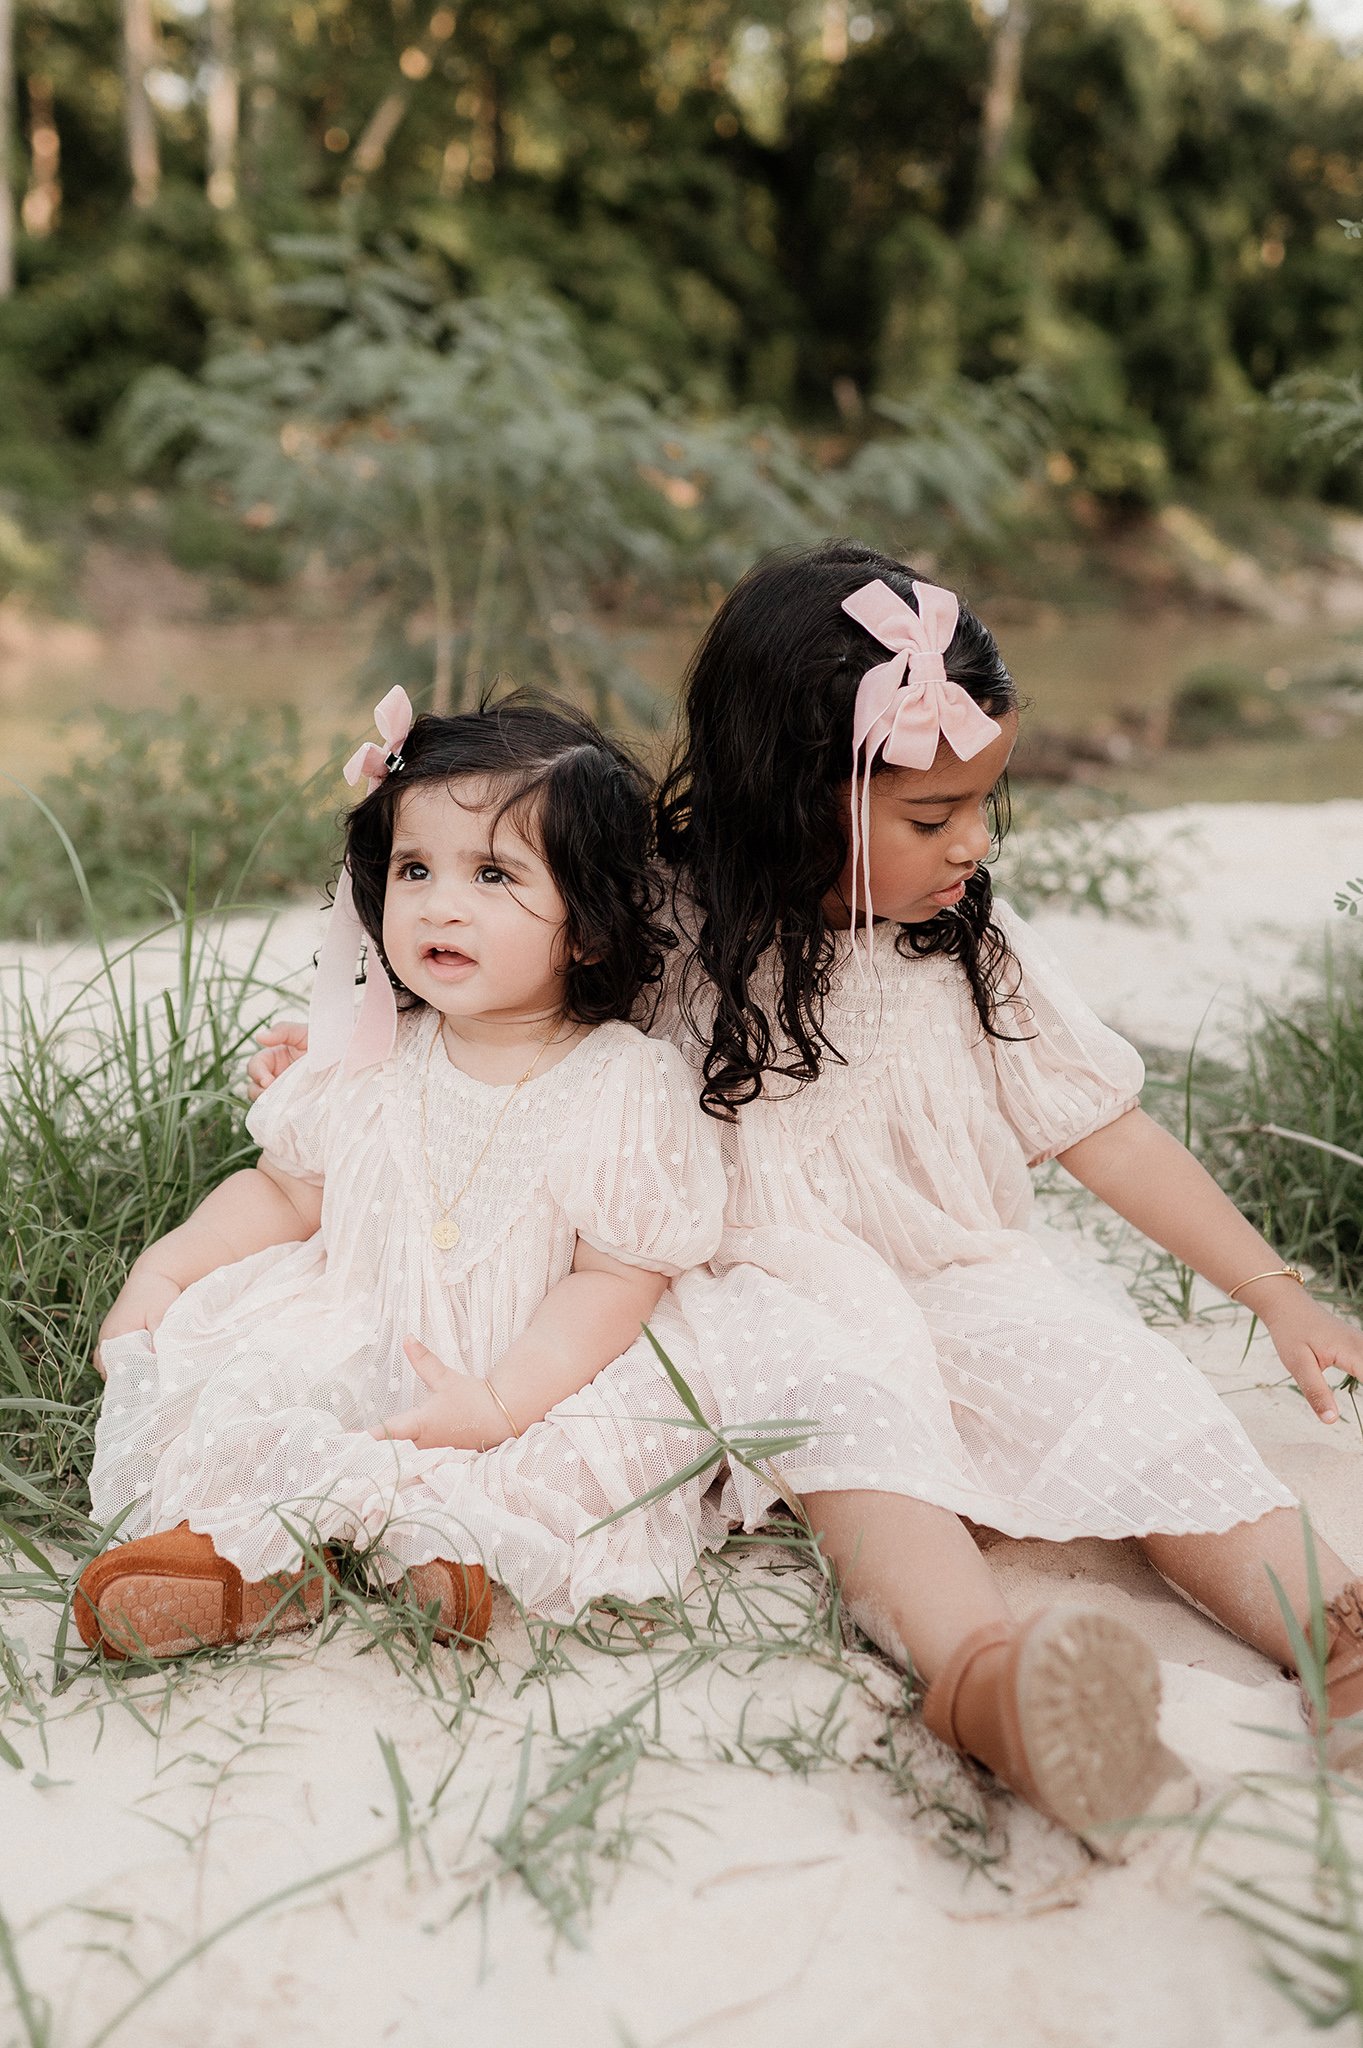 the woodlands family photographer _ conroe photographer _ houston family photographer _ ashley gillen photography _ texas family photographer _ conroe wedding photographer _ conroe texas _ cshi29.jpg